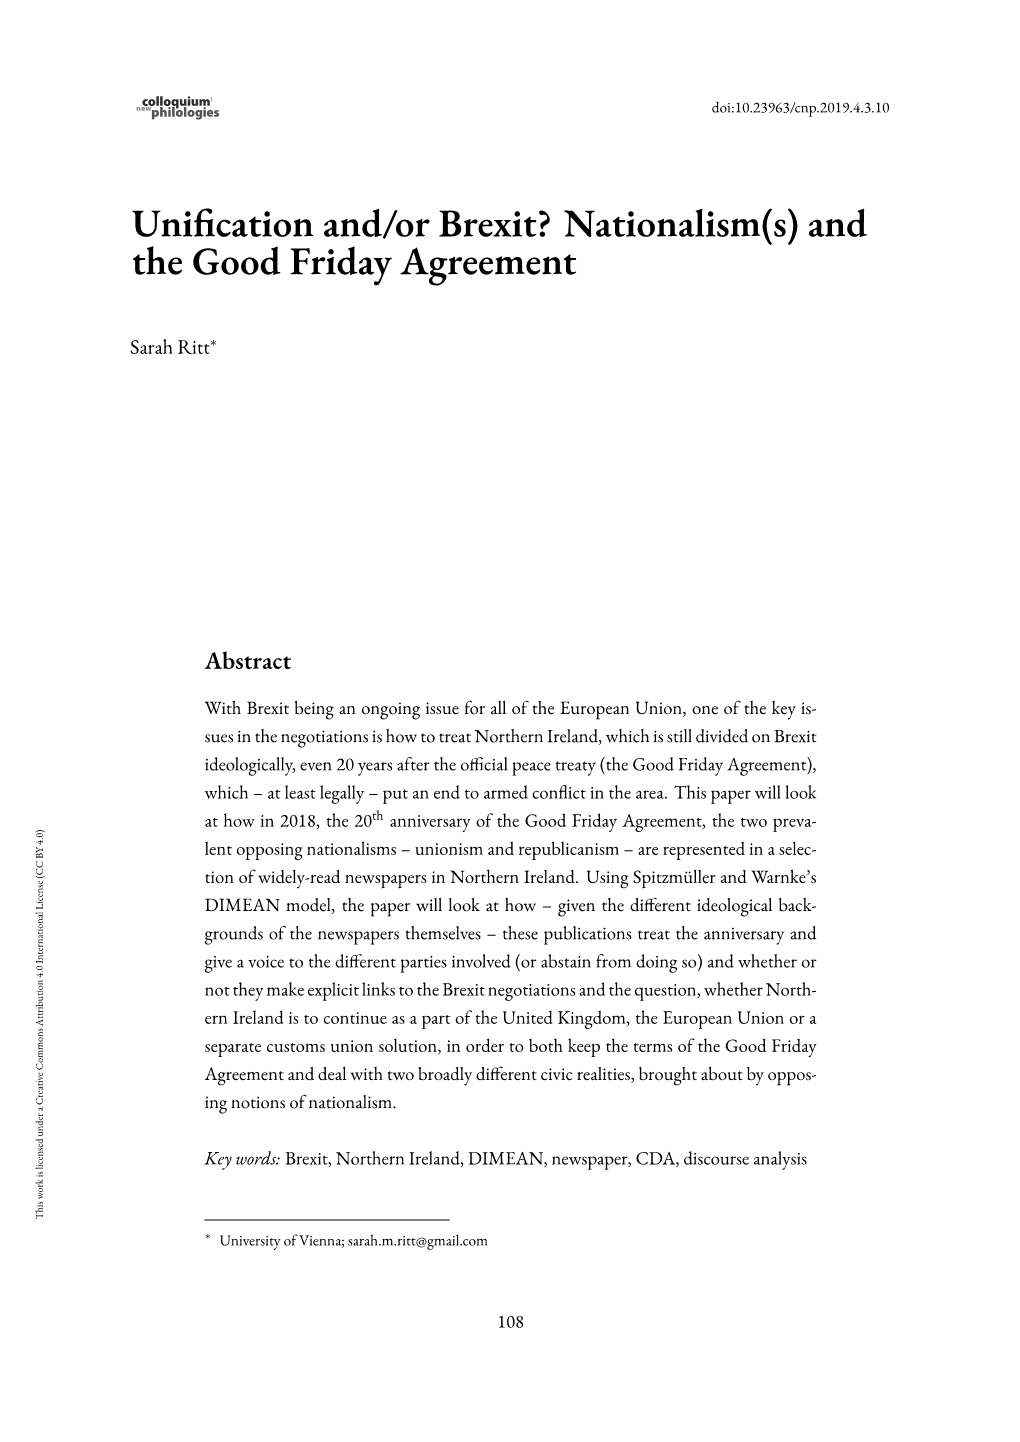 And the Good Friday Agreement